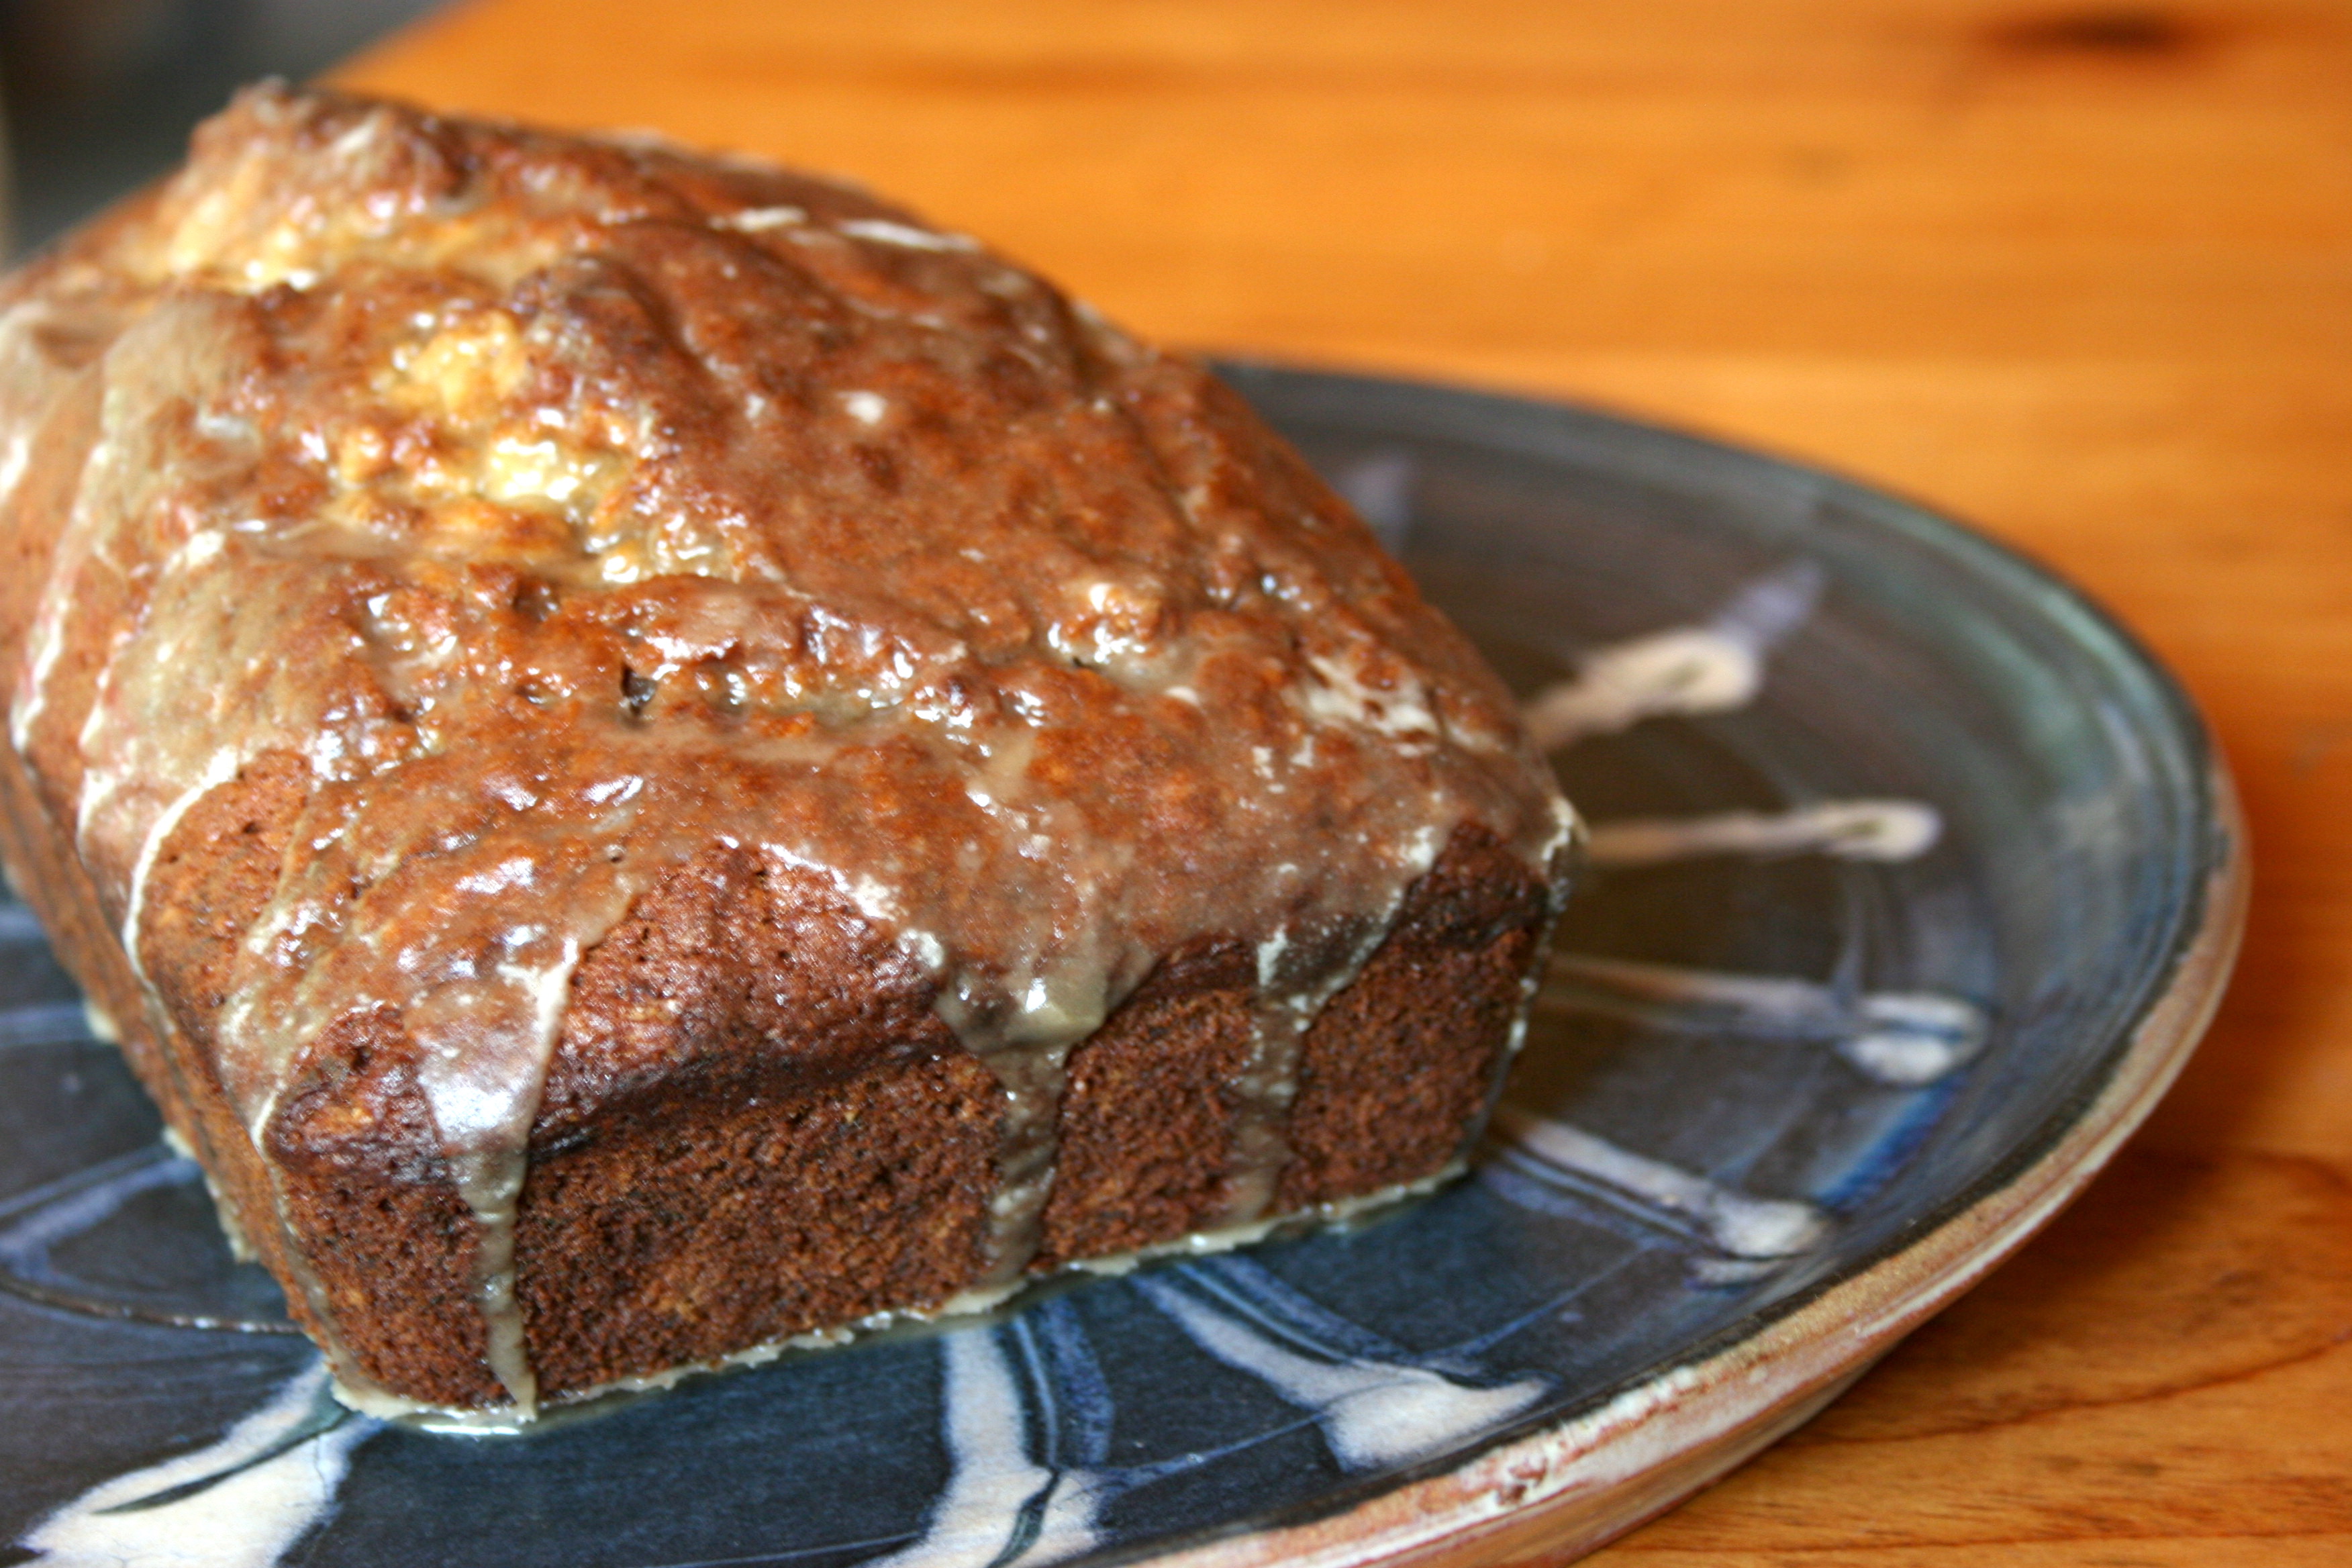 Not your every day banana bread